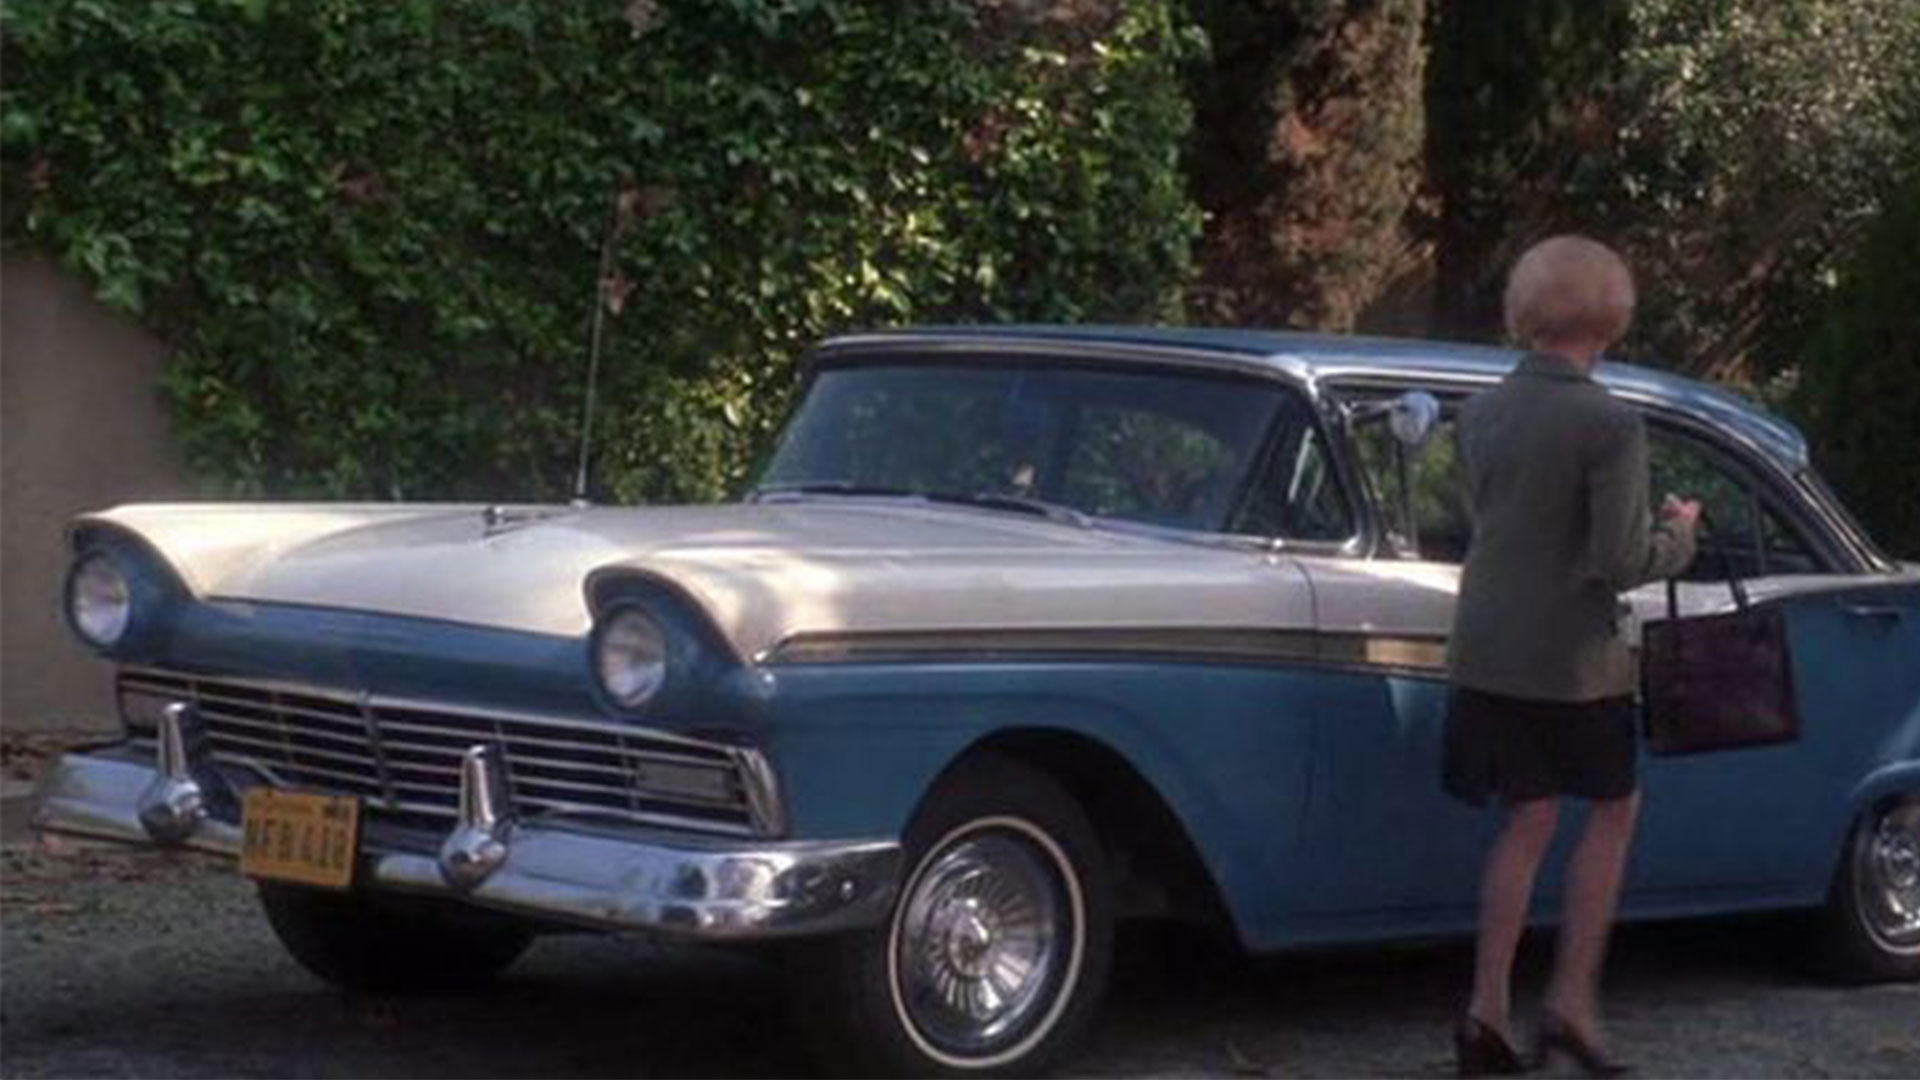 here are 13 of the best movie cars from scary (and scary-ish) classics